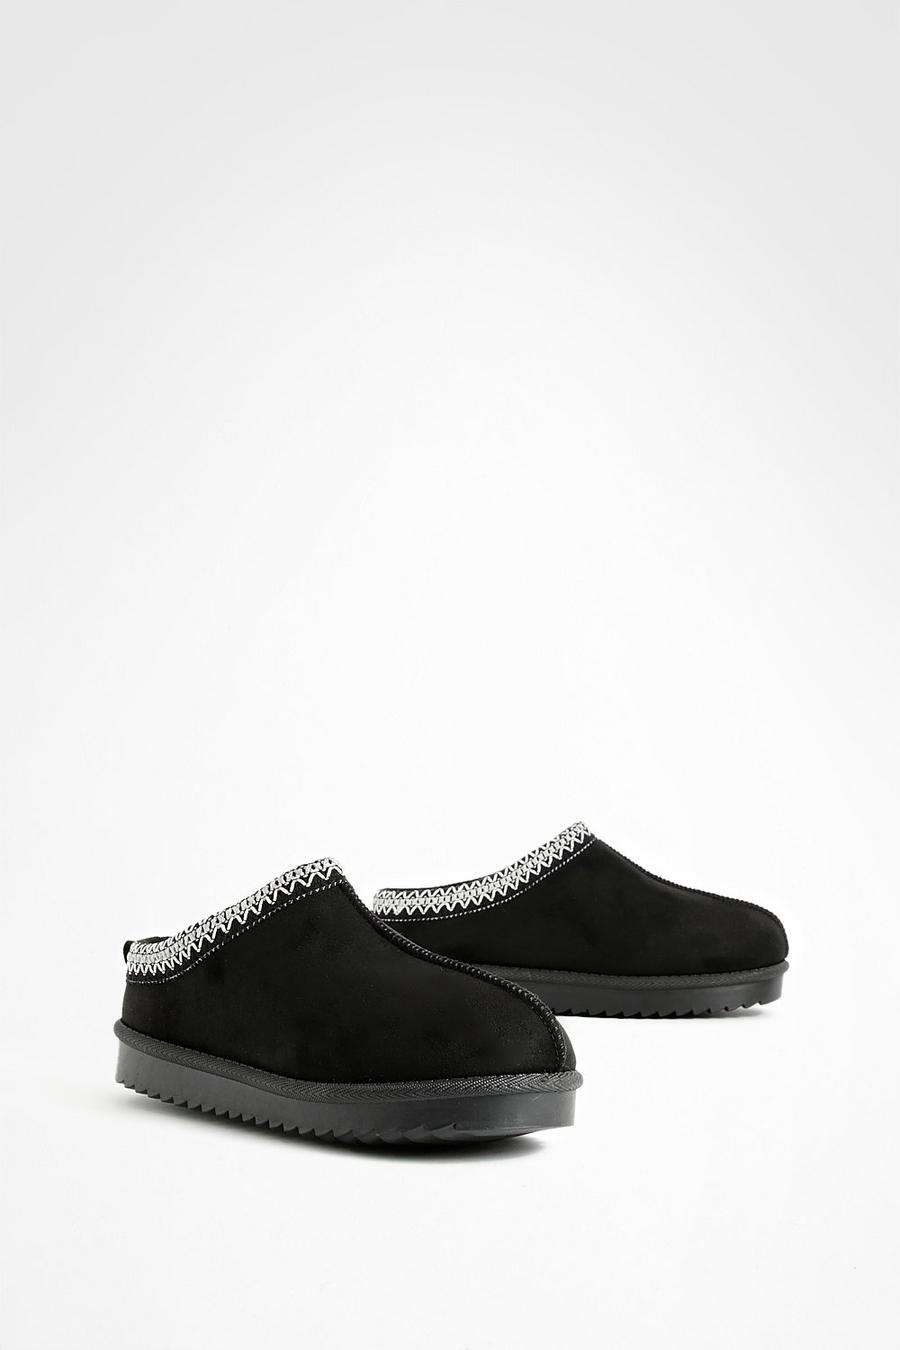 Black Embroidered  Slip On Cosy Mules      